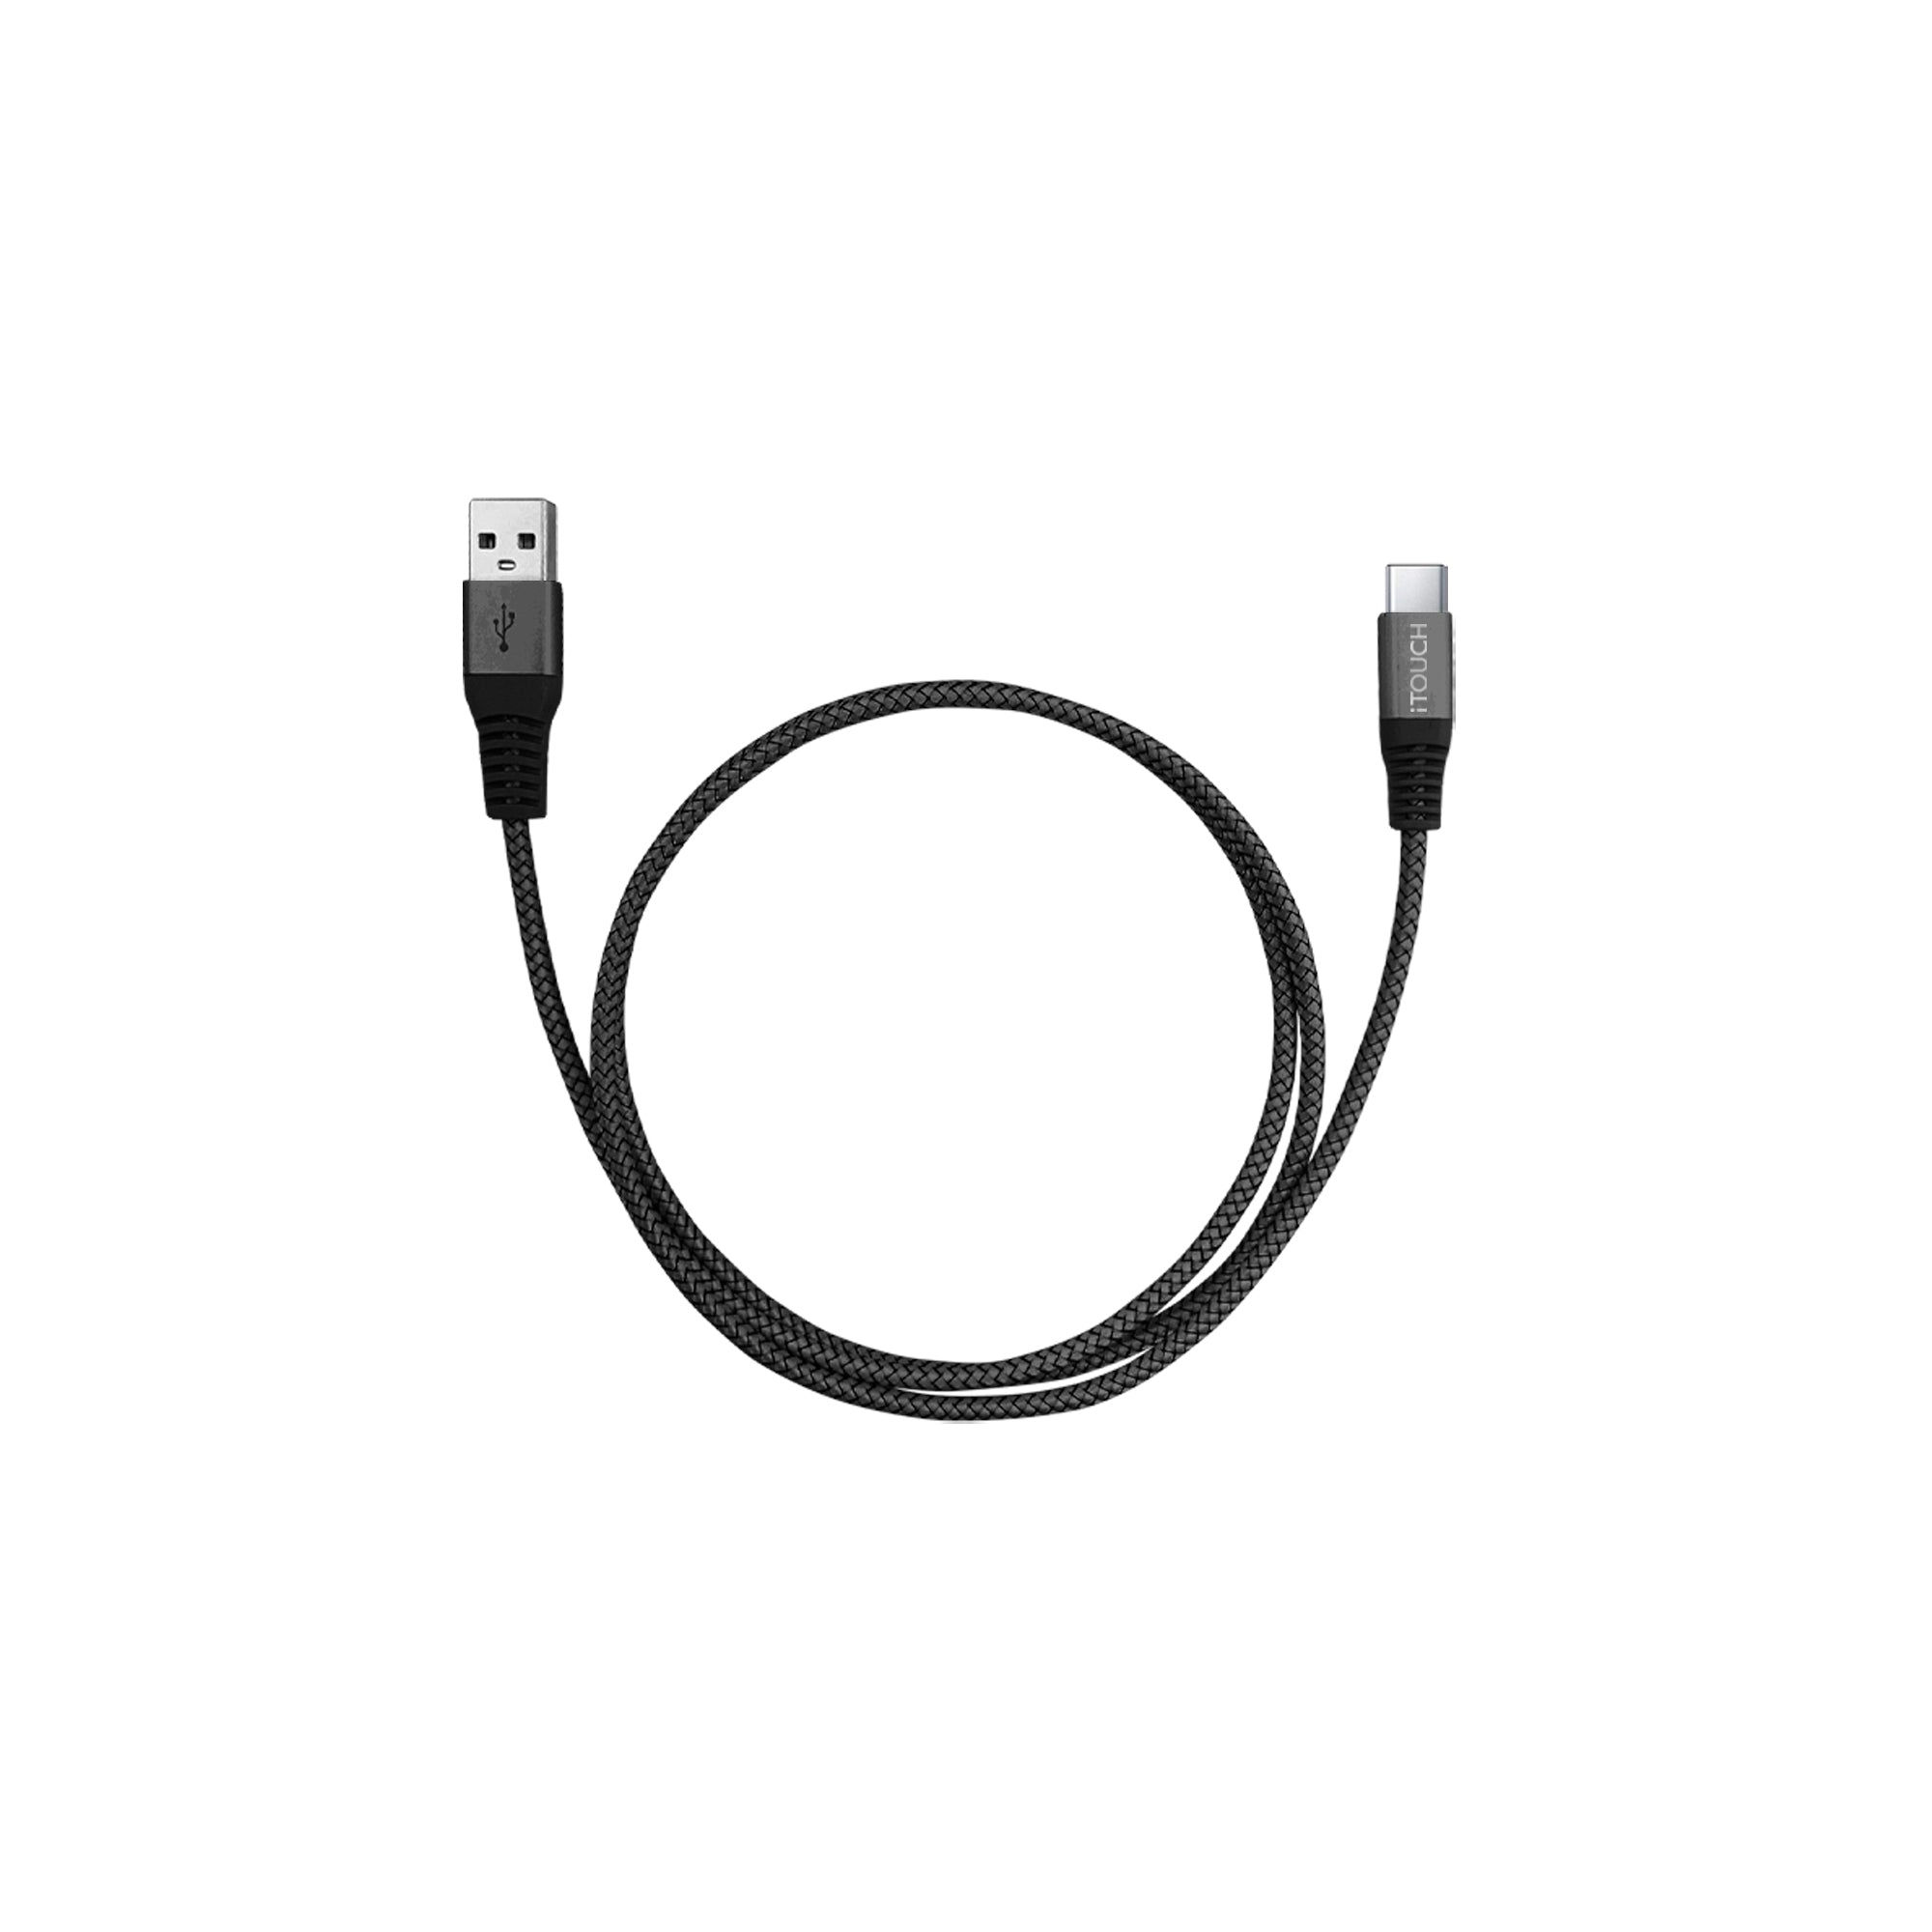 Black USB-C Charging Cable: 3FT affordable charger